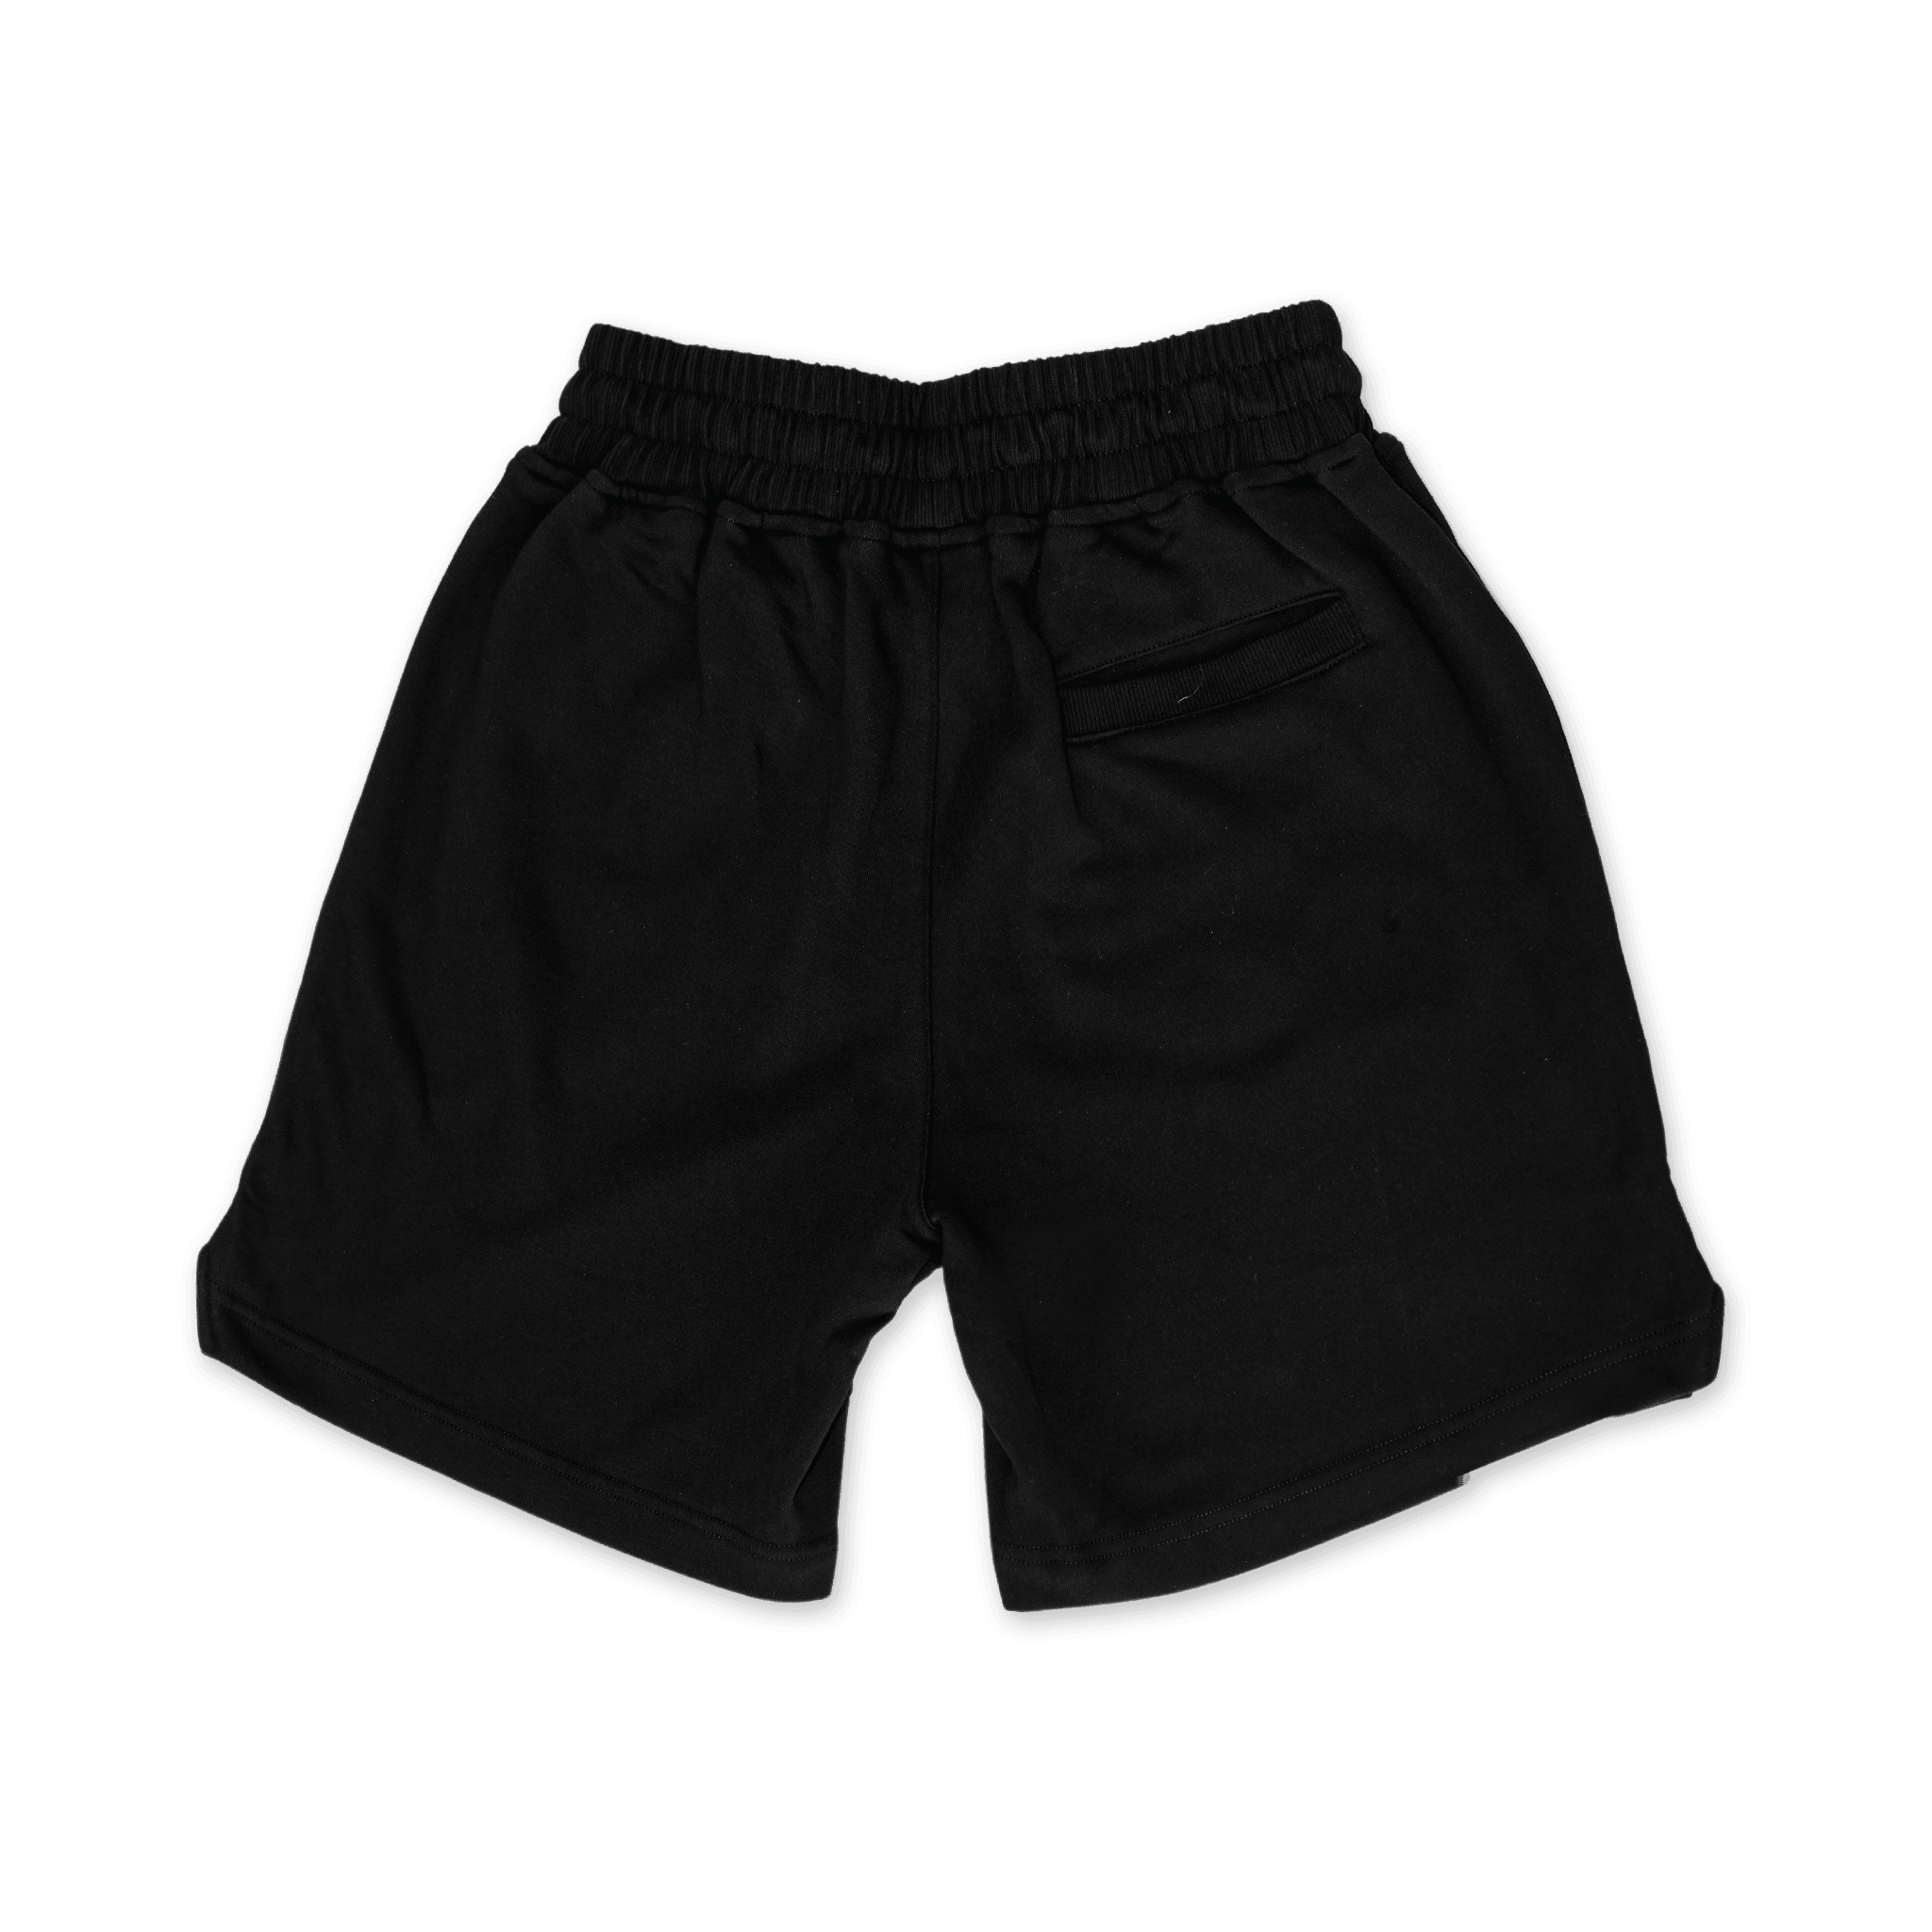 Black @ Shorts - All@Once